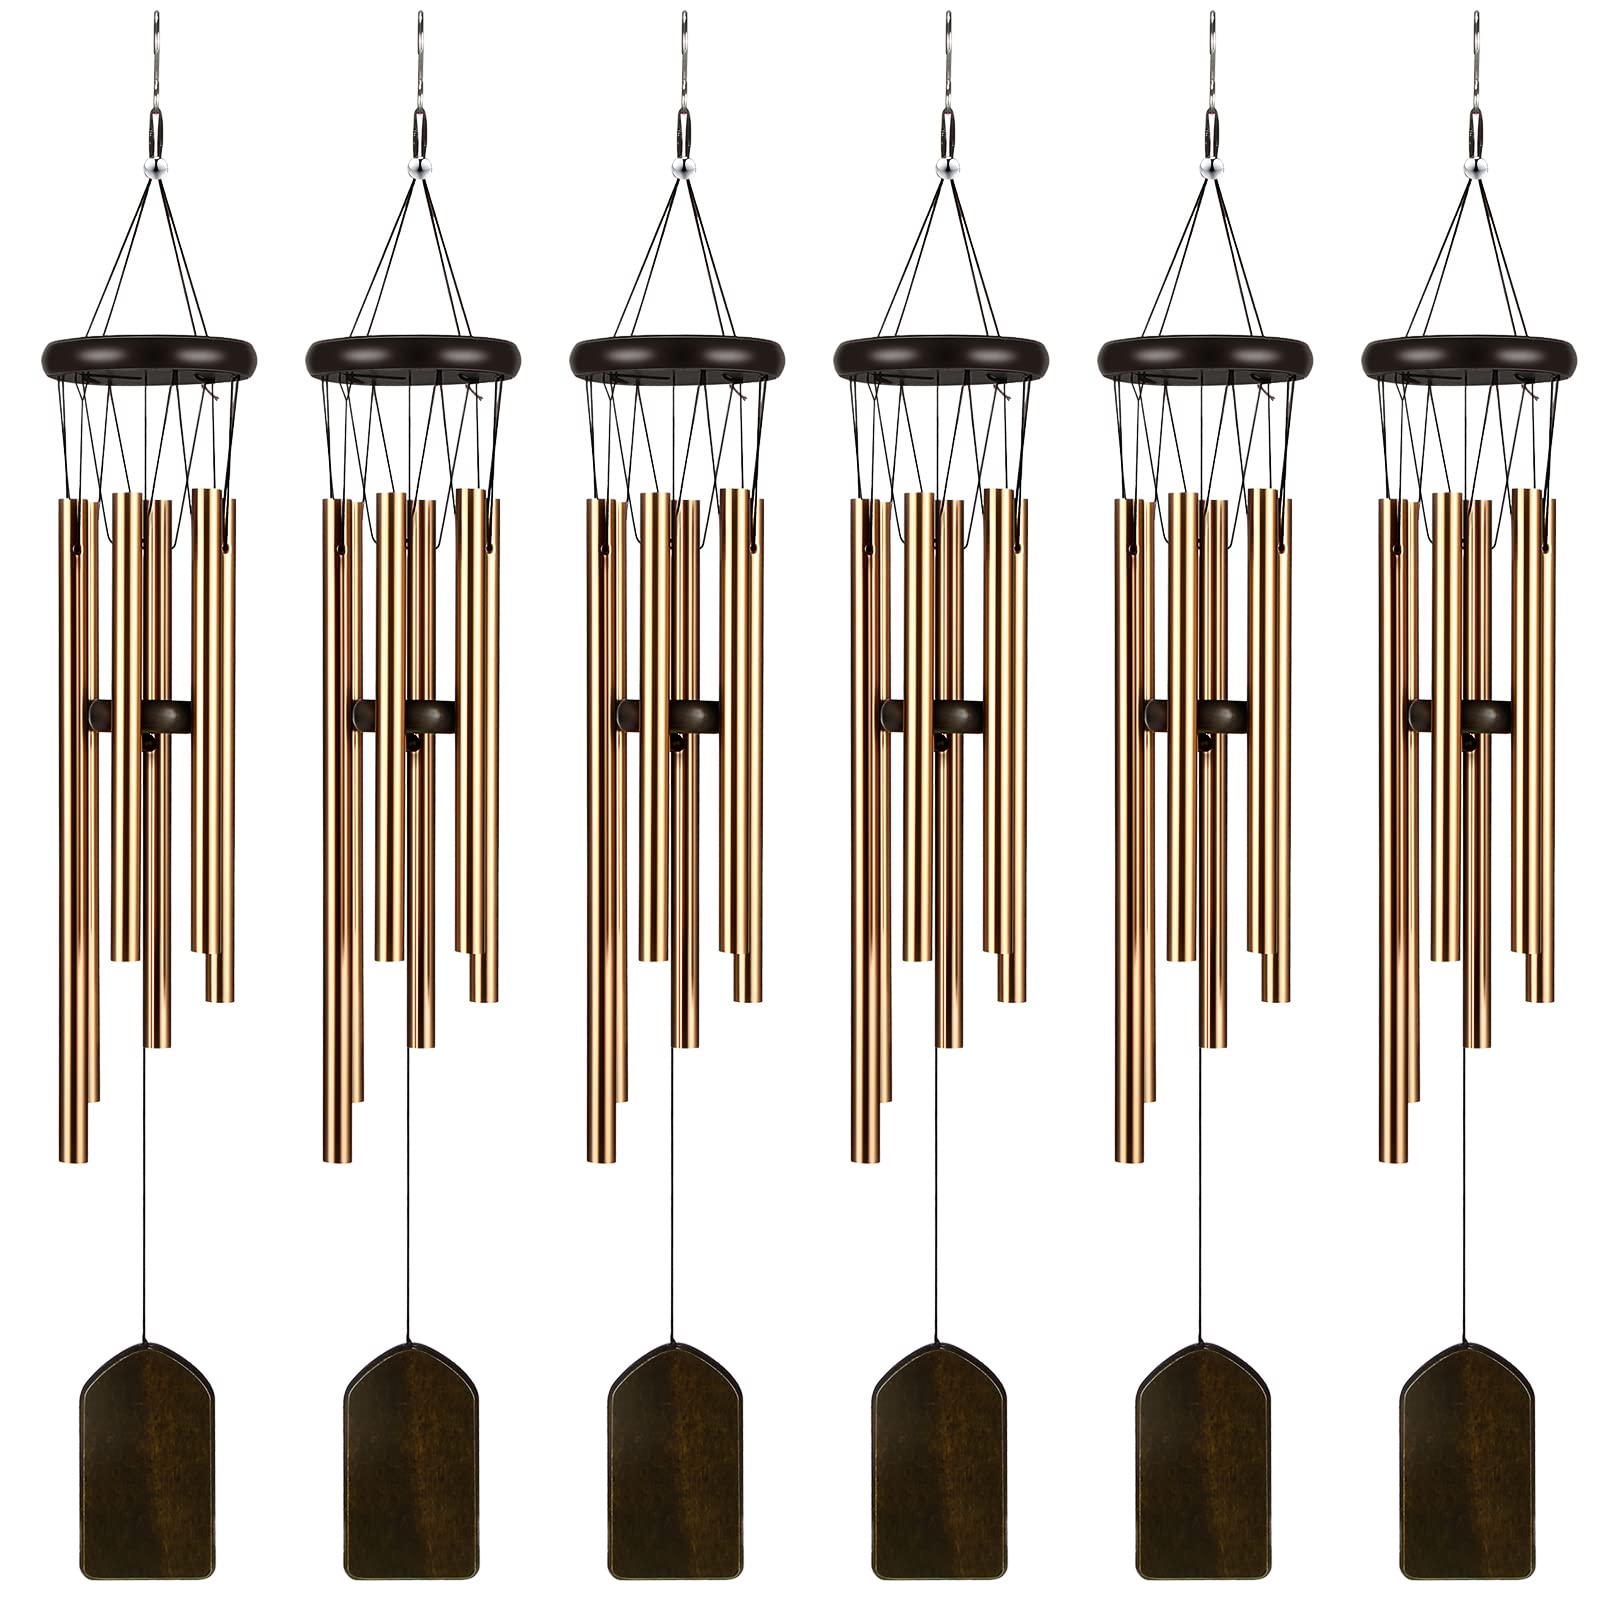 6 Pieces Wind Chimes 28 Inch Deep Tone Wind Chimes with 6 Aluminum Tubes Memorial Wind Chimes Outdoors Soothing Melody Wind Chimes Rustic Wind Chimes for Farmhouse Garden Patio Home Decor (Bronze)